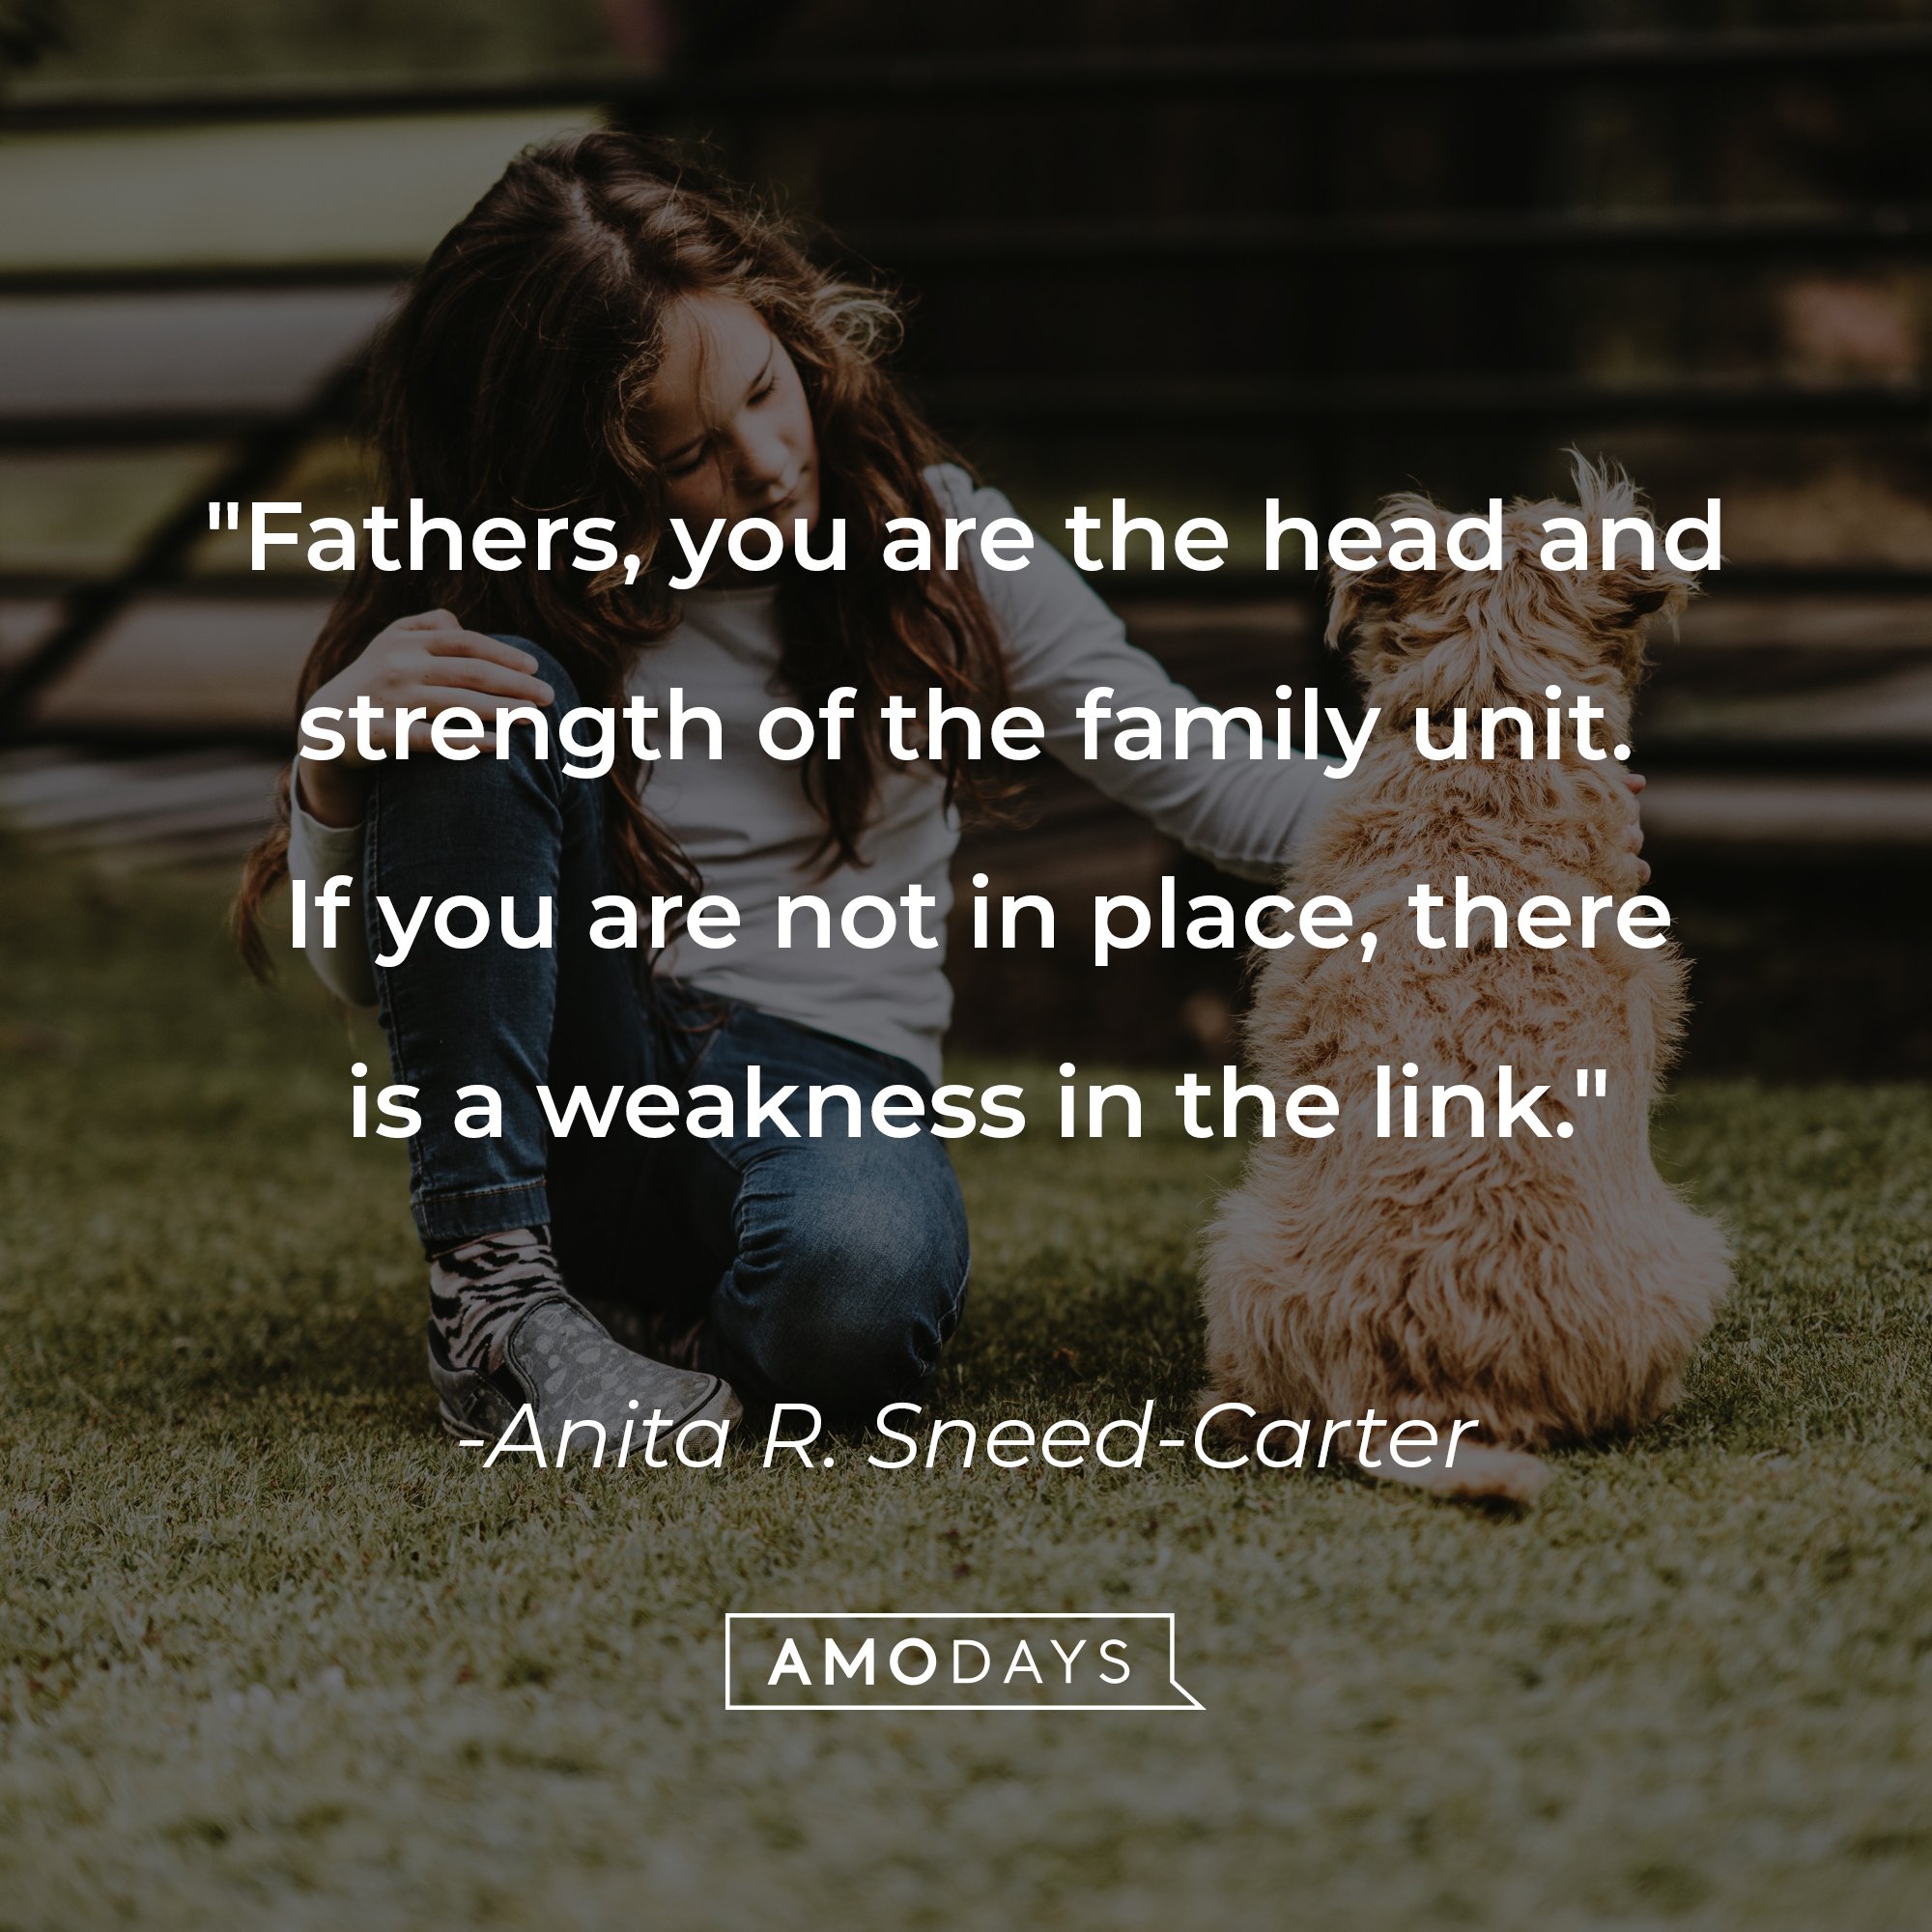 Anita R. Sneed-Carter's quote: "Fathers, you are the head and strength of the family unit. If you are not in place, there is a weakness in the link." | Image: AmoDays